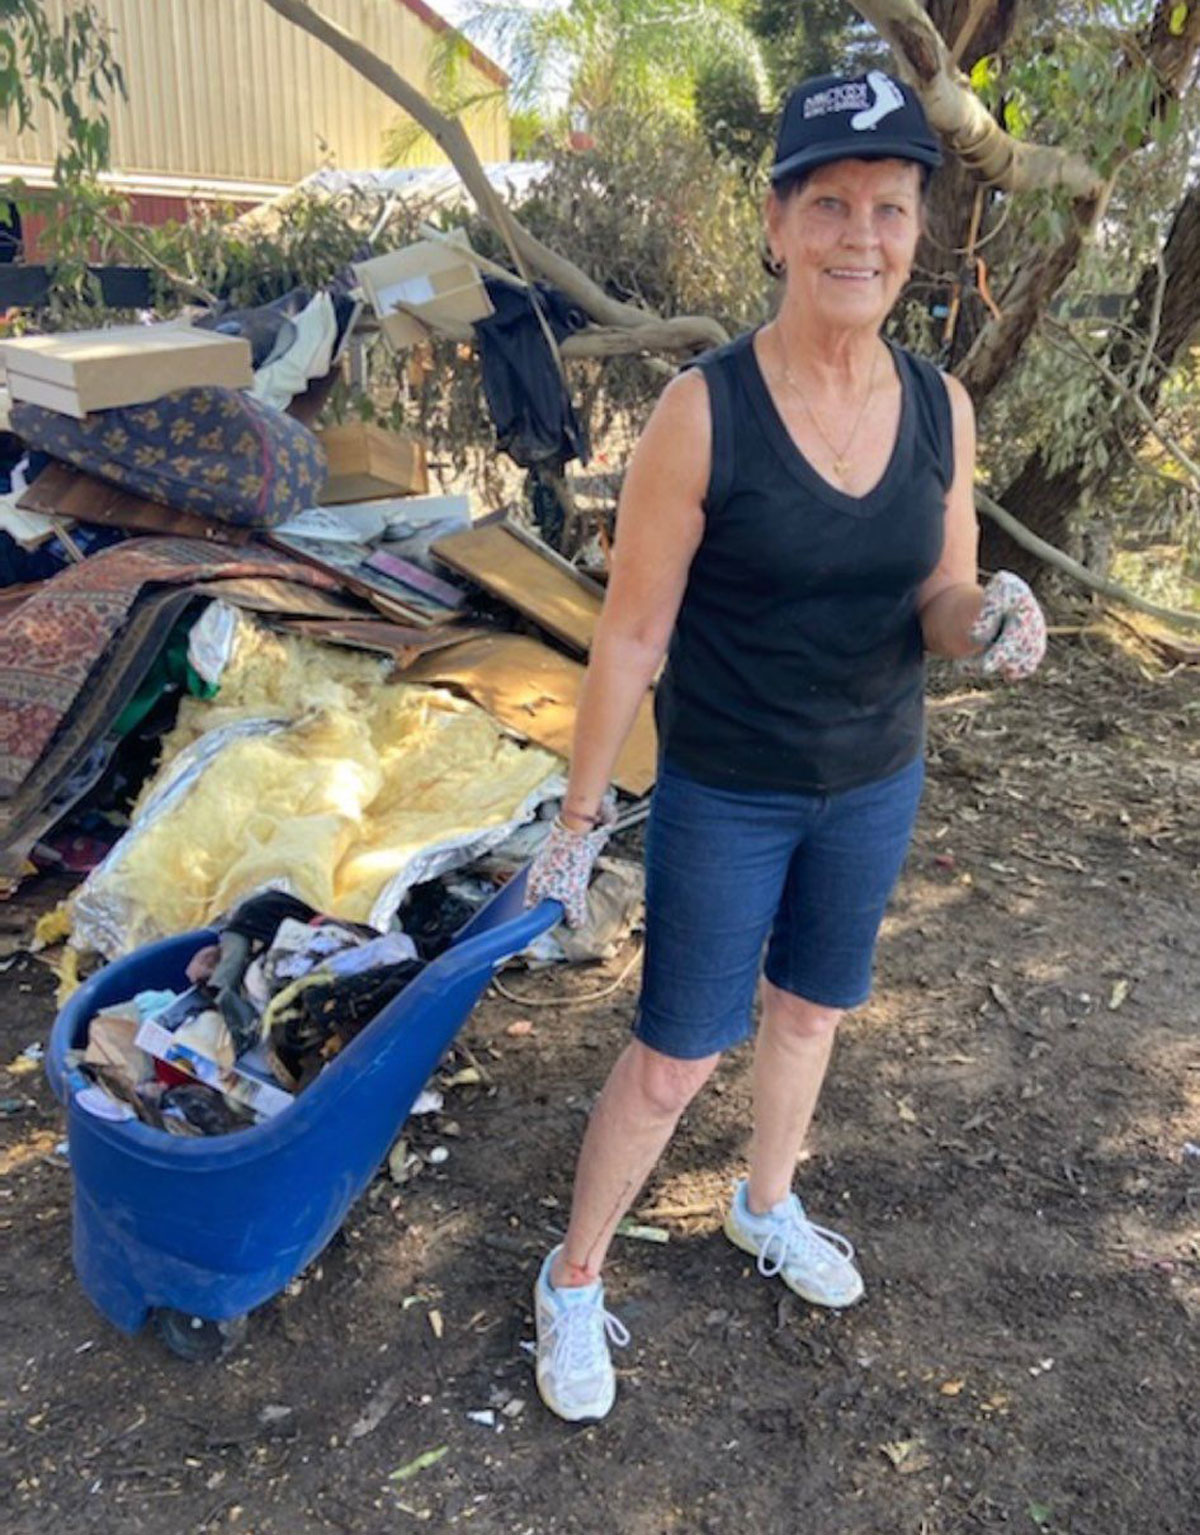 Pam Roper lends a helping hand to clean up after the recent floods.